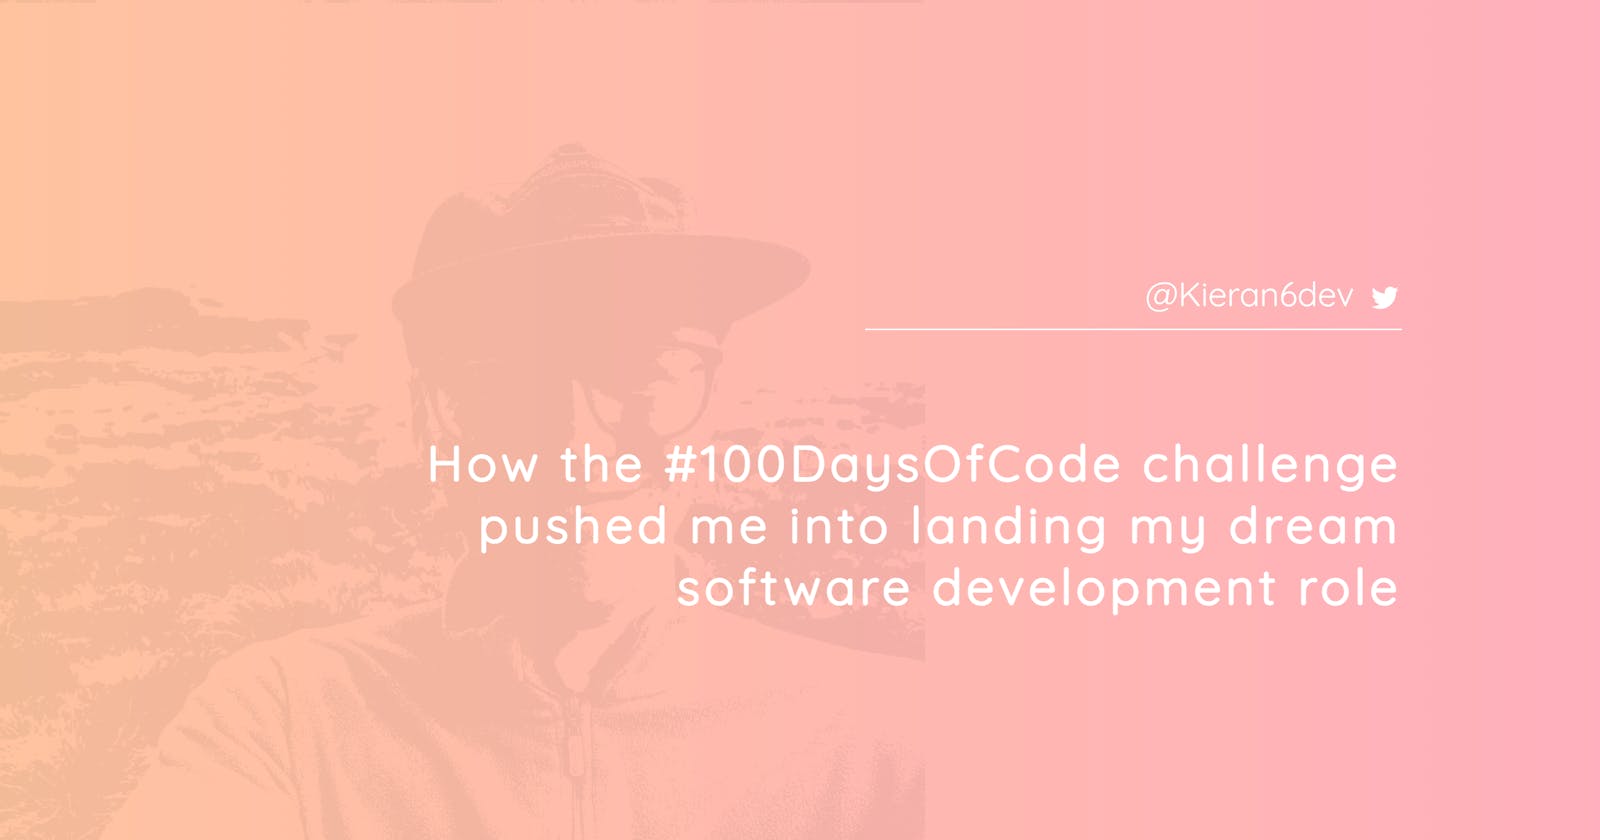 How the #100DaysOfCode challenge pushed me into landing my dream software development role